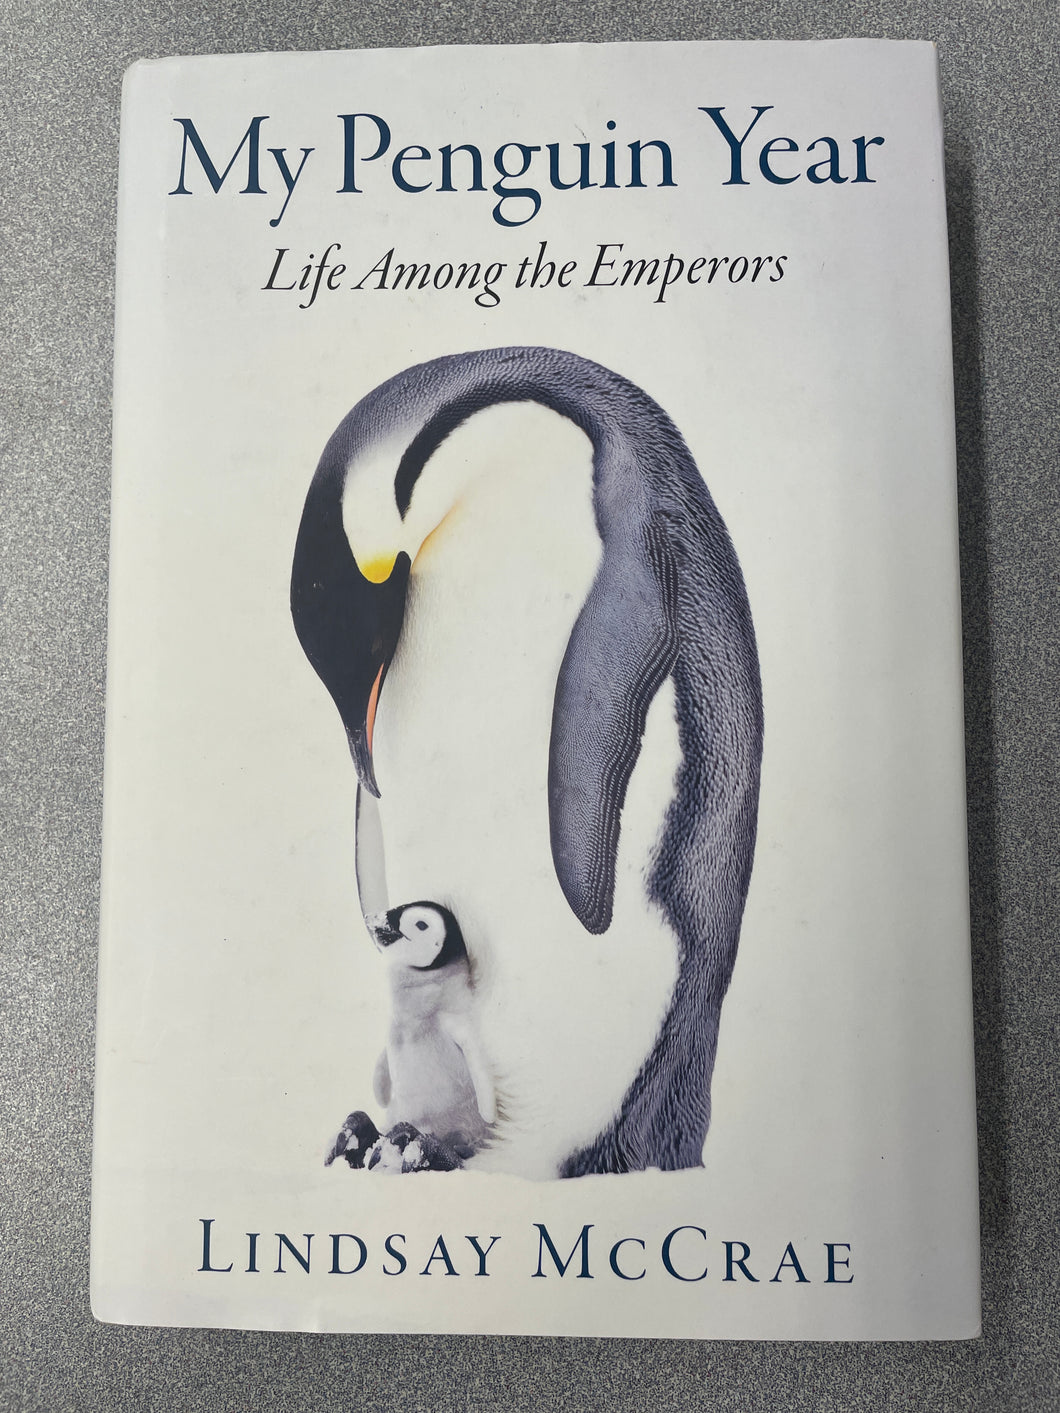 My Penguin Year: Life Among the Emperors, McCrae, Lindsay [2019] SN 10/23